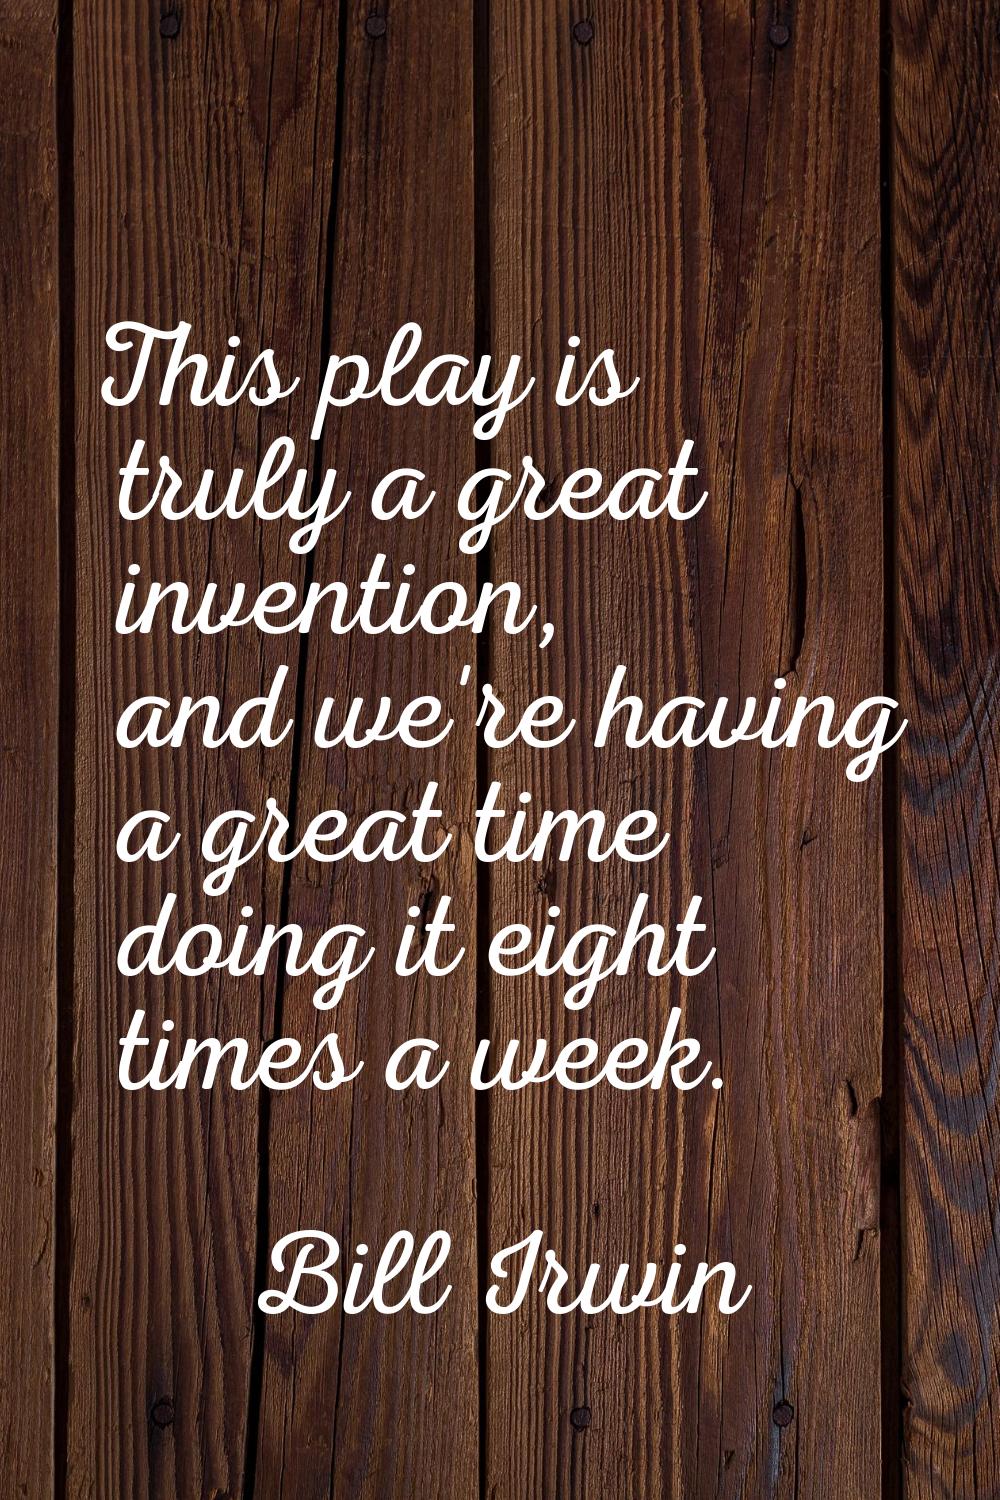 This play is truly a great invention, and we're having a great time doing it eight times a week.